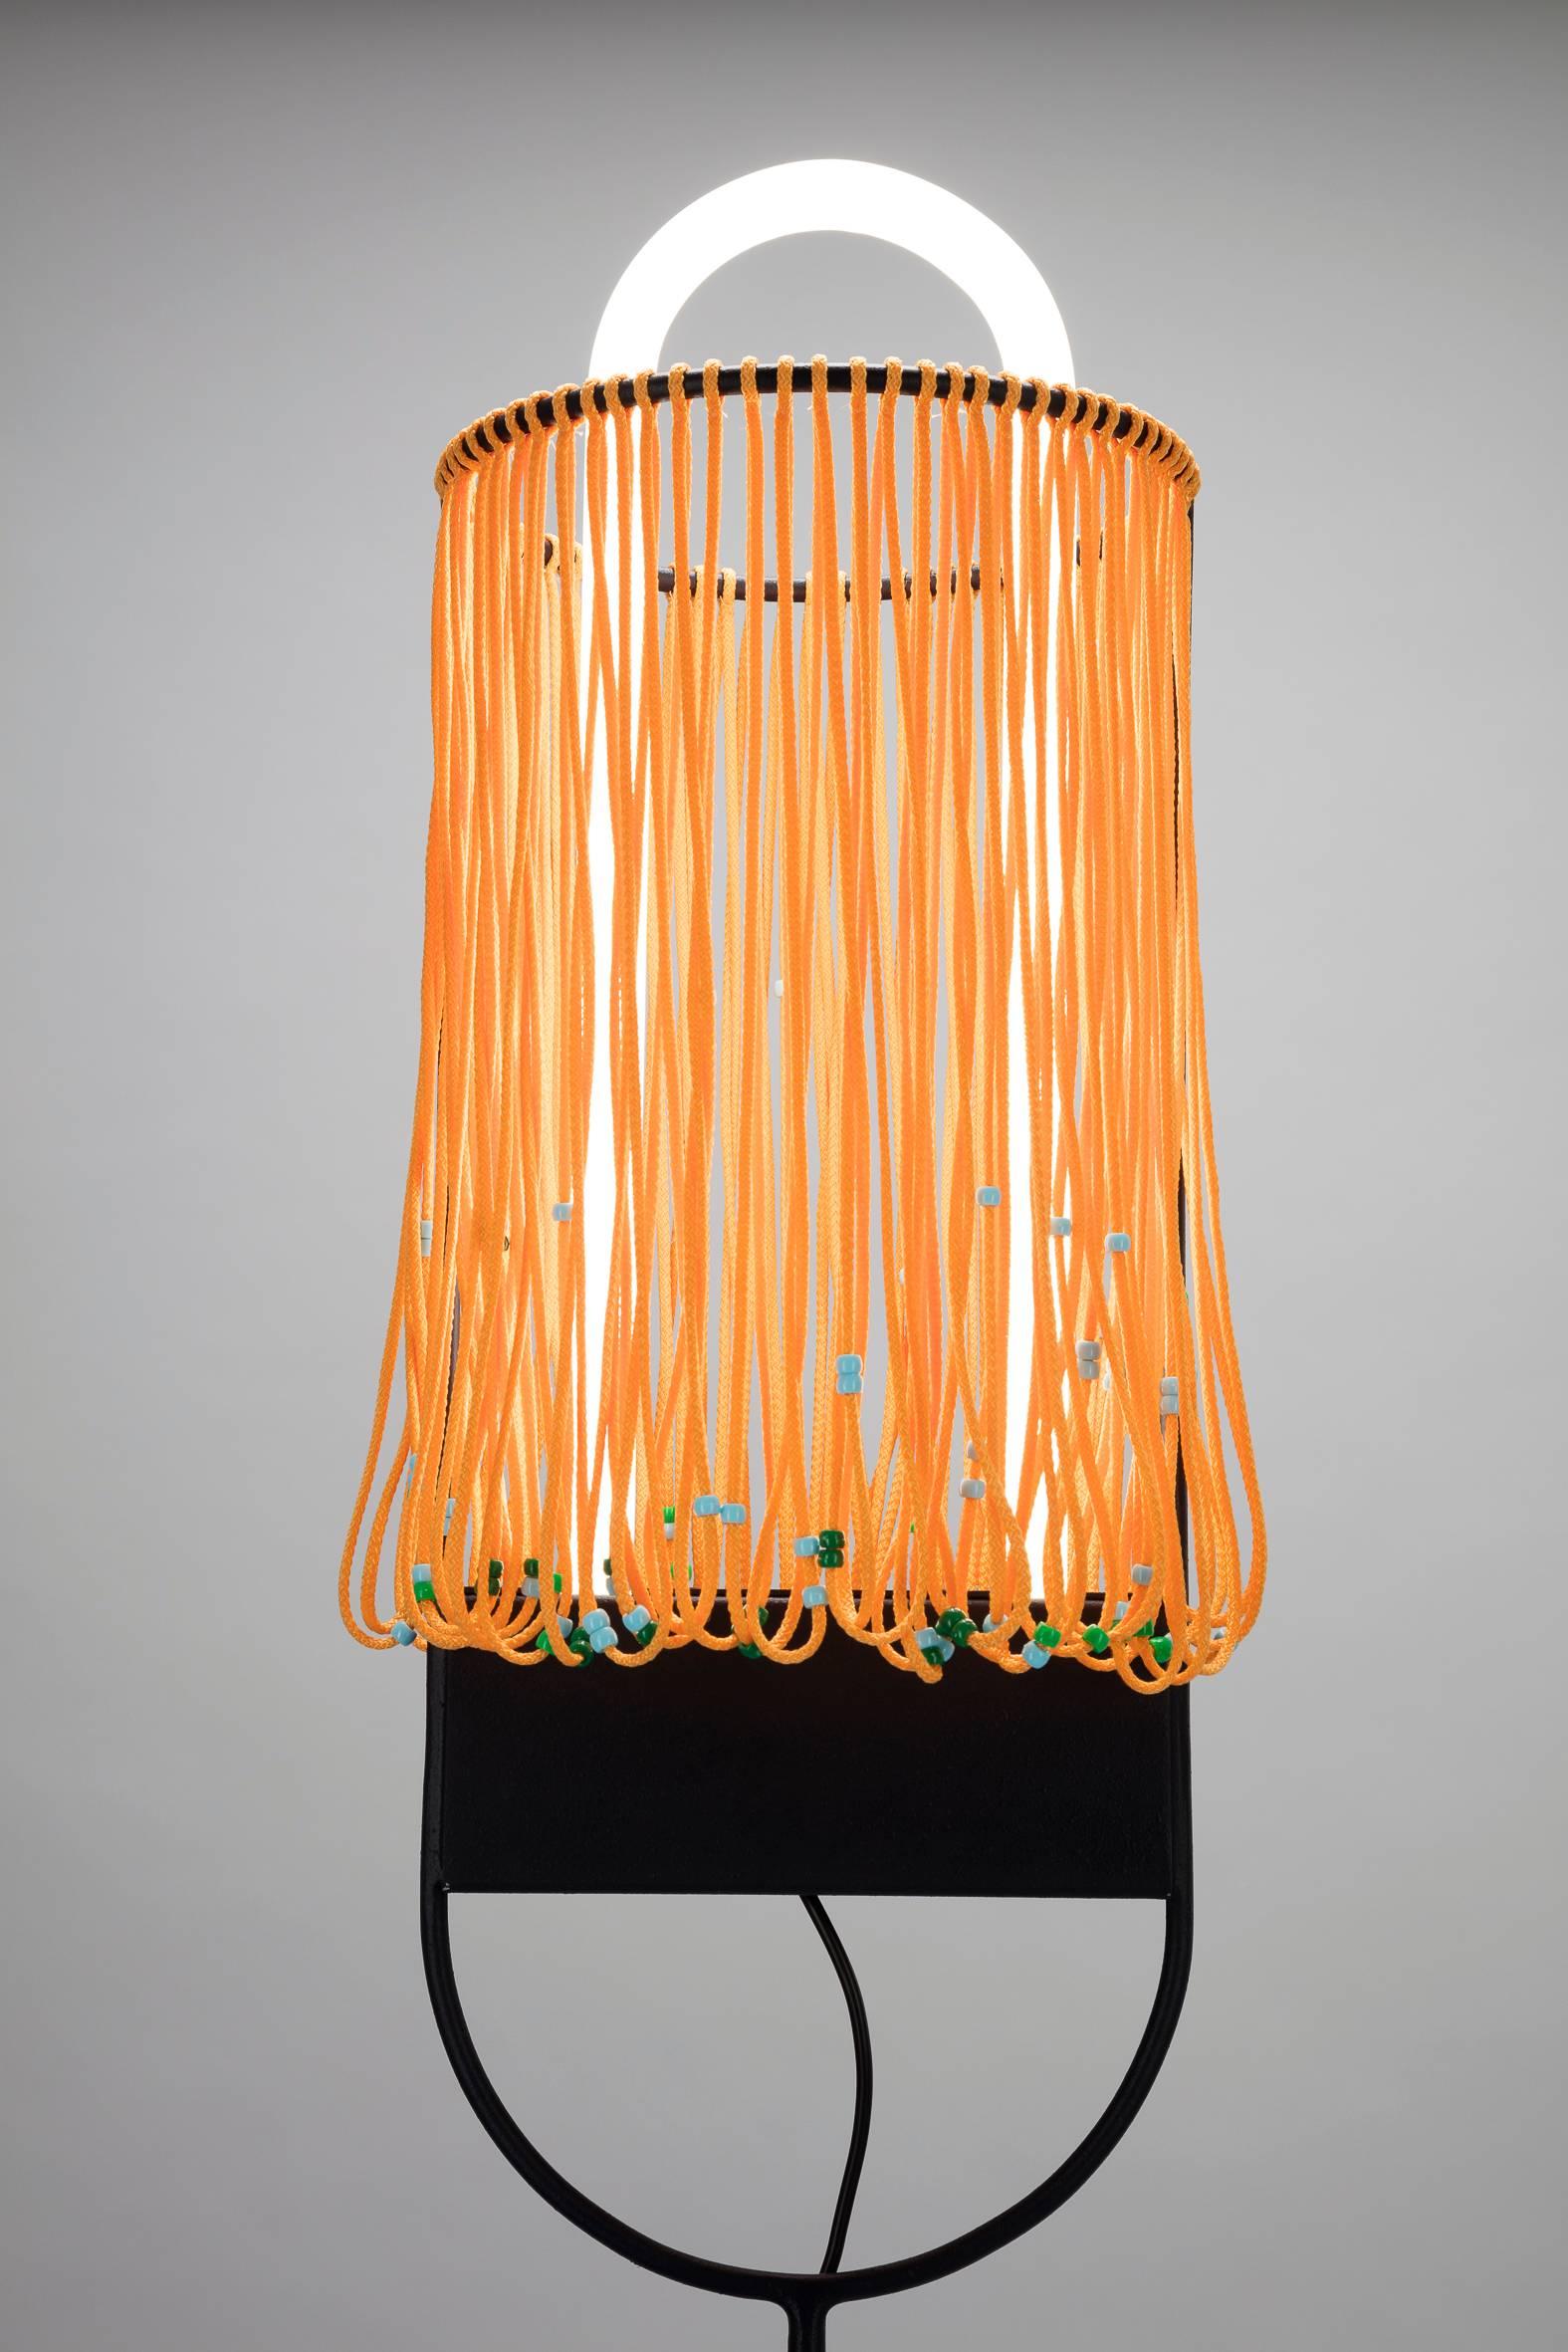 A collection of colorful standing lights with a curved neon light erecting through a ring of hanging ropes, with plastic pearls. 

Designer: Clemence Seilles 
Materials: Neon light, metal, rope
Dimensions: 27 x 156 cm
Weight: 5.716 kg.